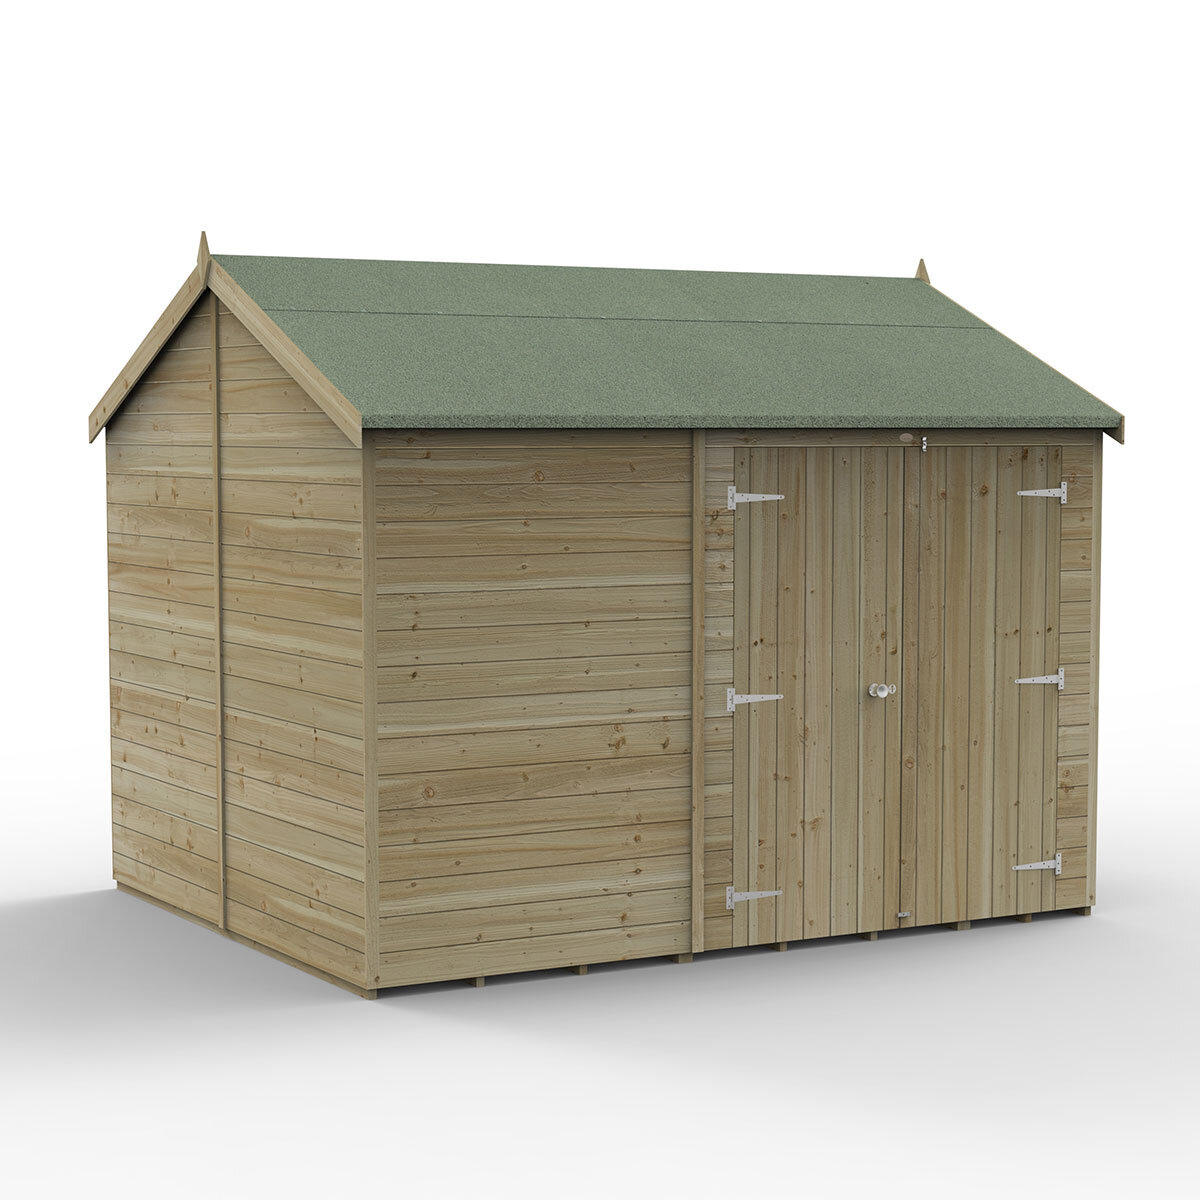 Forest Garden Timberdale 10ft x 8ft 3" (3 x 2.5m) Tongue & Groove Wooden Storage Shed 